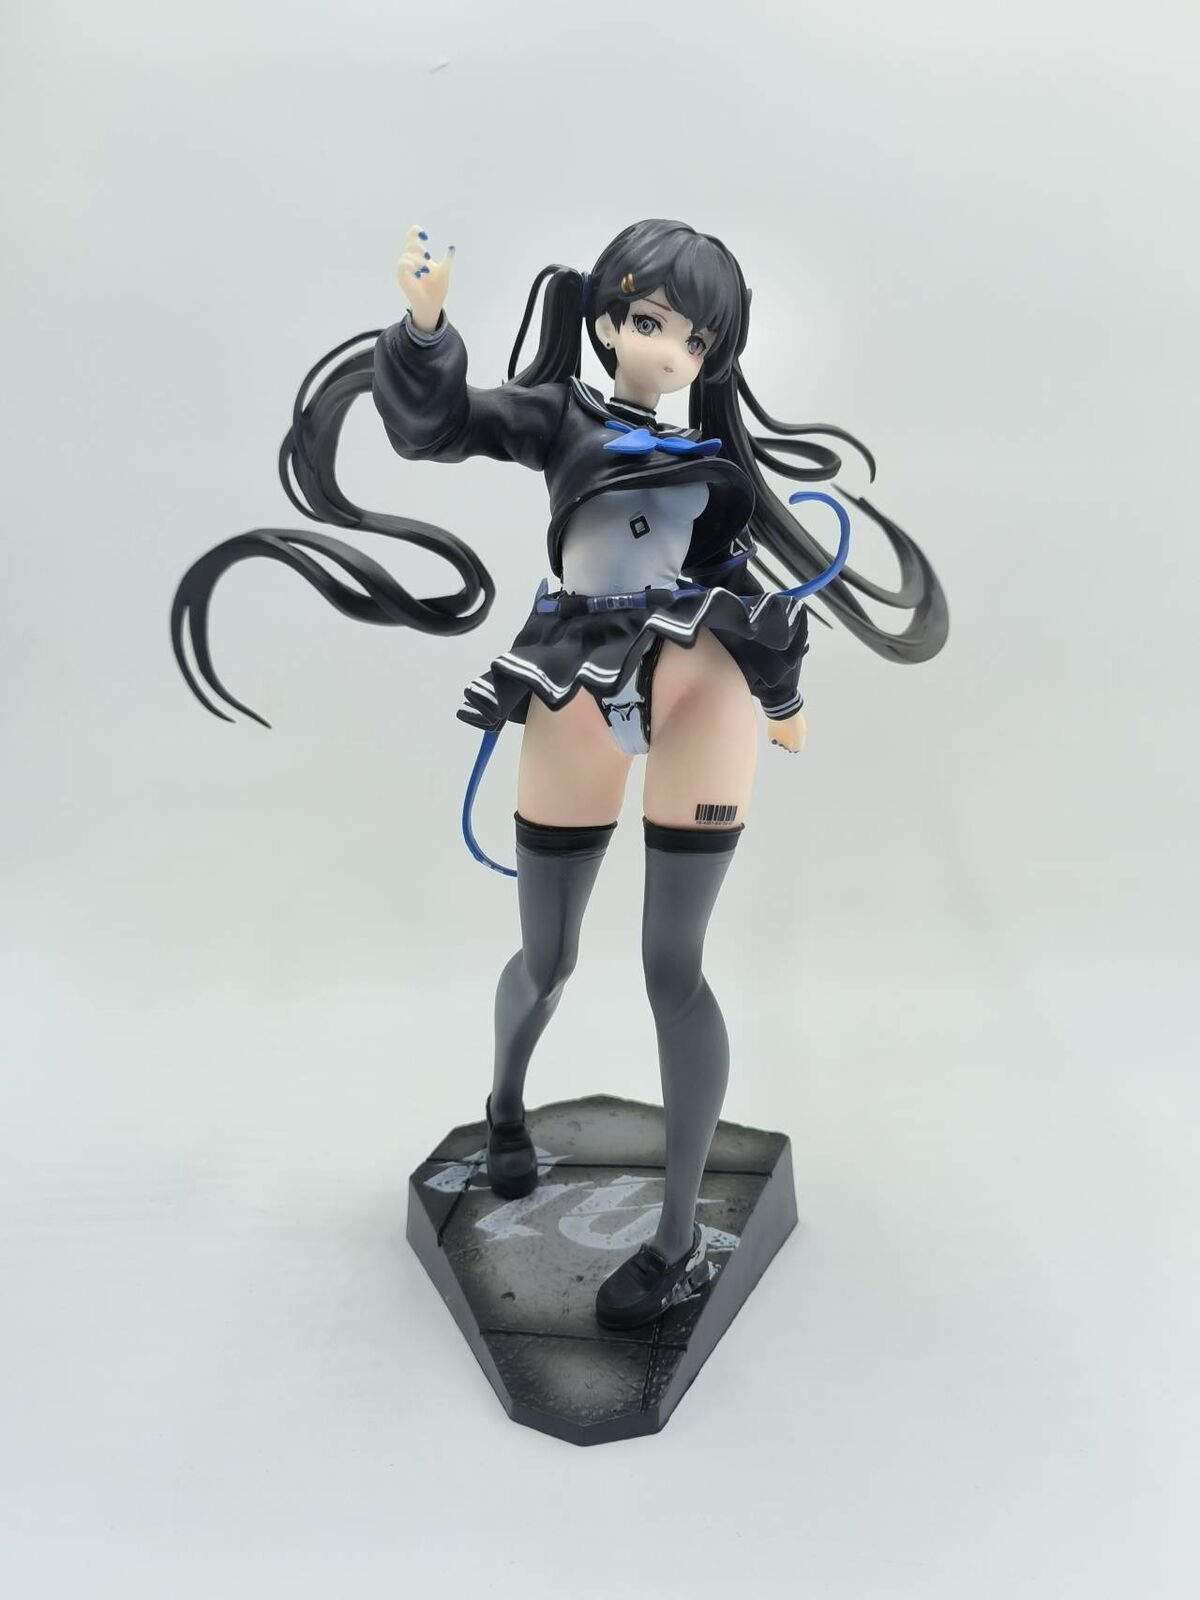 Interesting Solarain Colors BLUE Anime Girl Figure Toys 1/7Scale Collection Model Doll NoBox on eBay